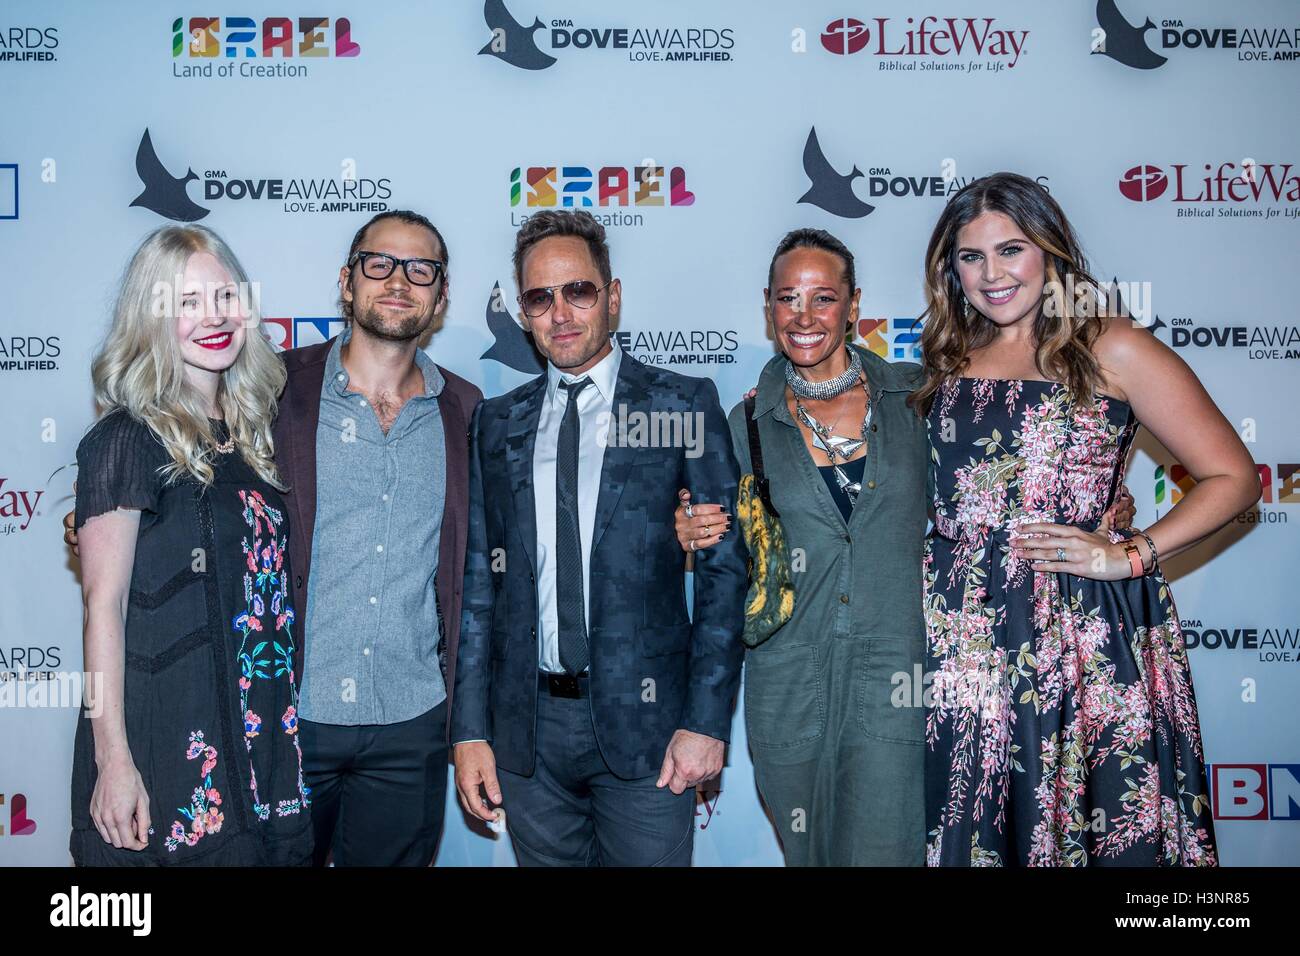 Nashville, Tennessee, USA. 11th Oct, Lacie Fowler, Bryan Fowler, TobyMac, Amanda Levy McKeehan Hillary Scott at the 47th Annual GMA Dove Awards in Nashville, TN at Allen Arena on the